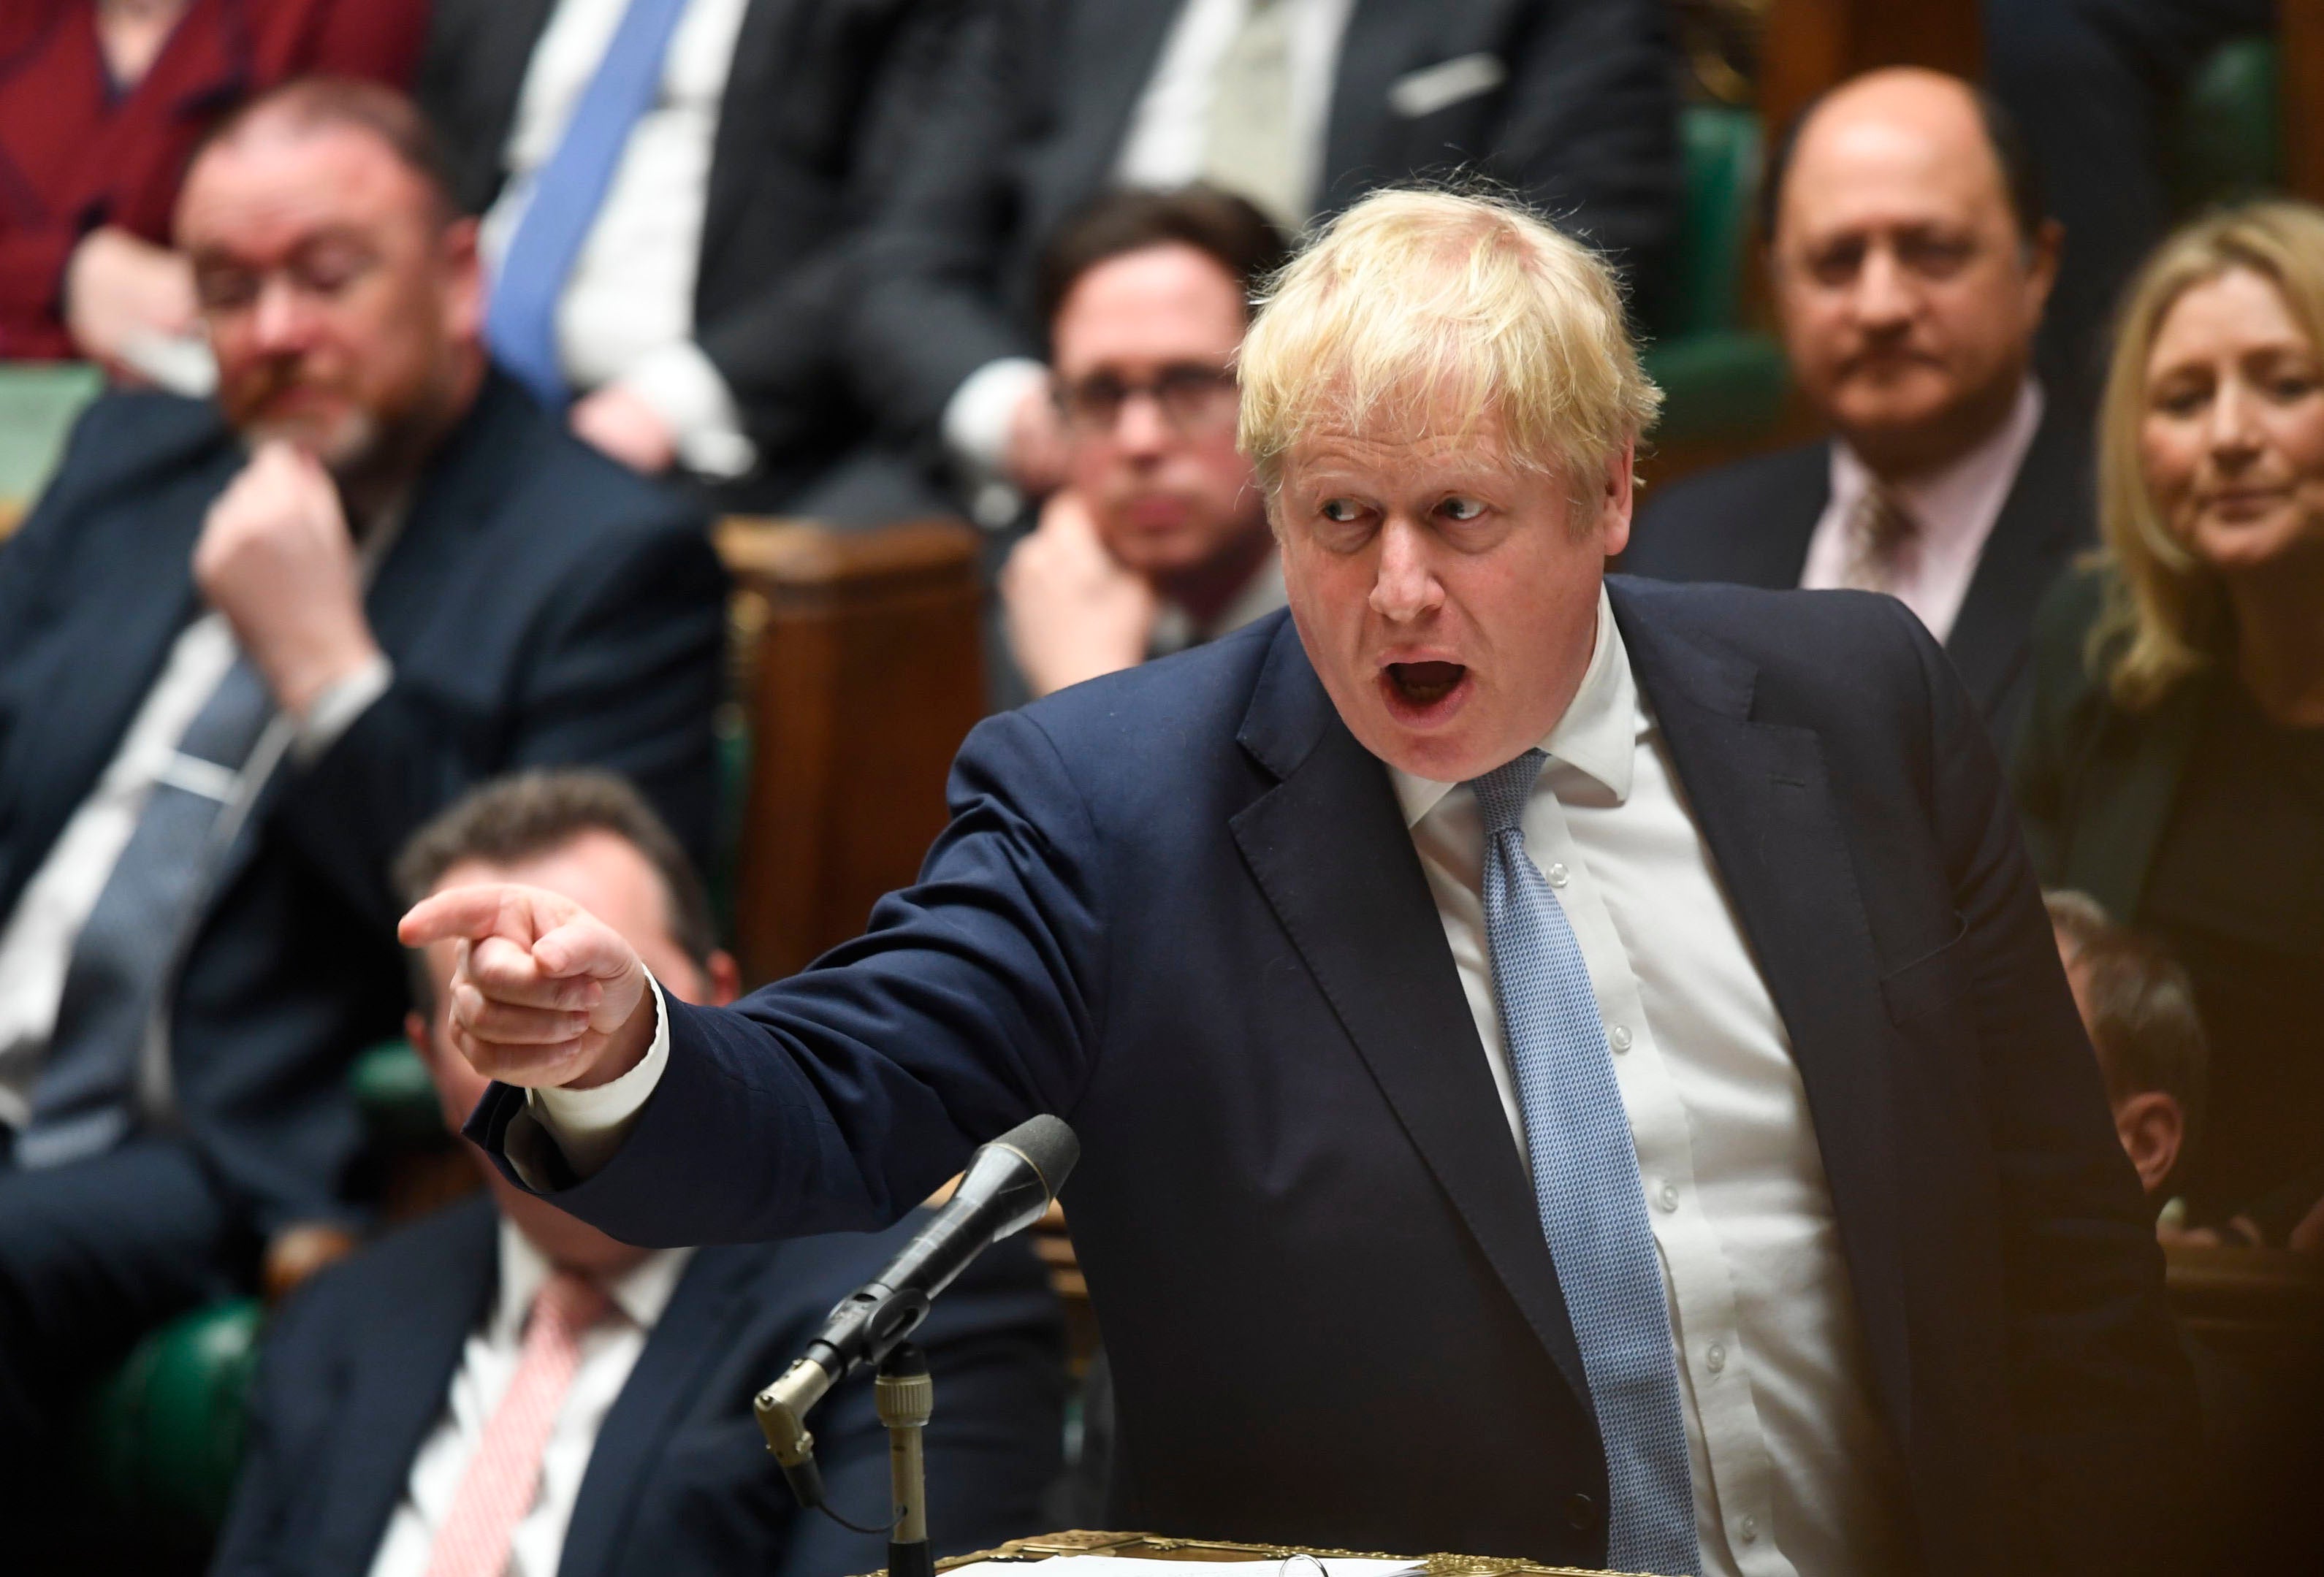 Boris Johnson wins breathing space from ‘partygate’ woes | The Independent